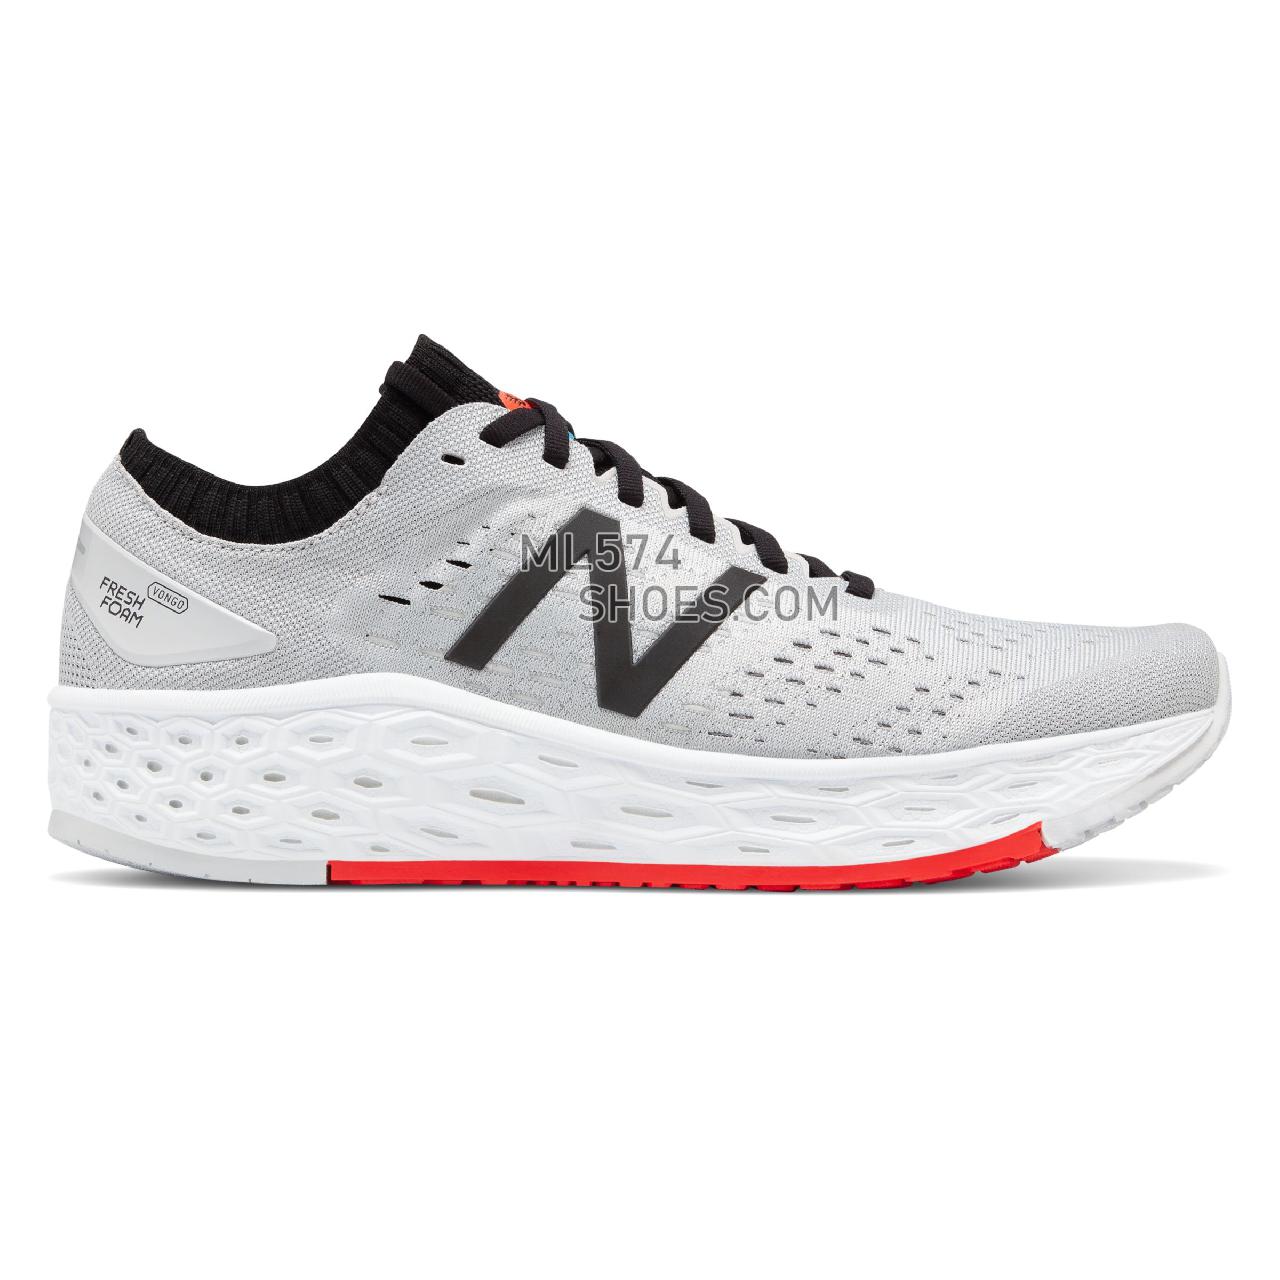 New Balance Fresh Foam Vongo v4 - Men's Stability Running - Light Aluminum with Black and Energy Red - MVNGOWG4